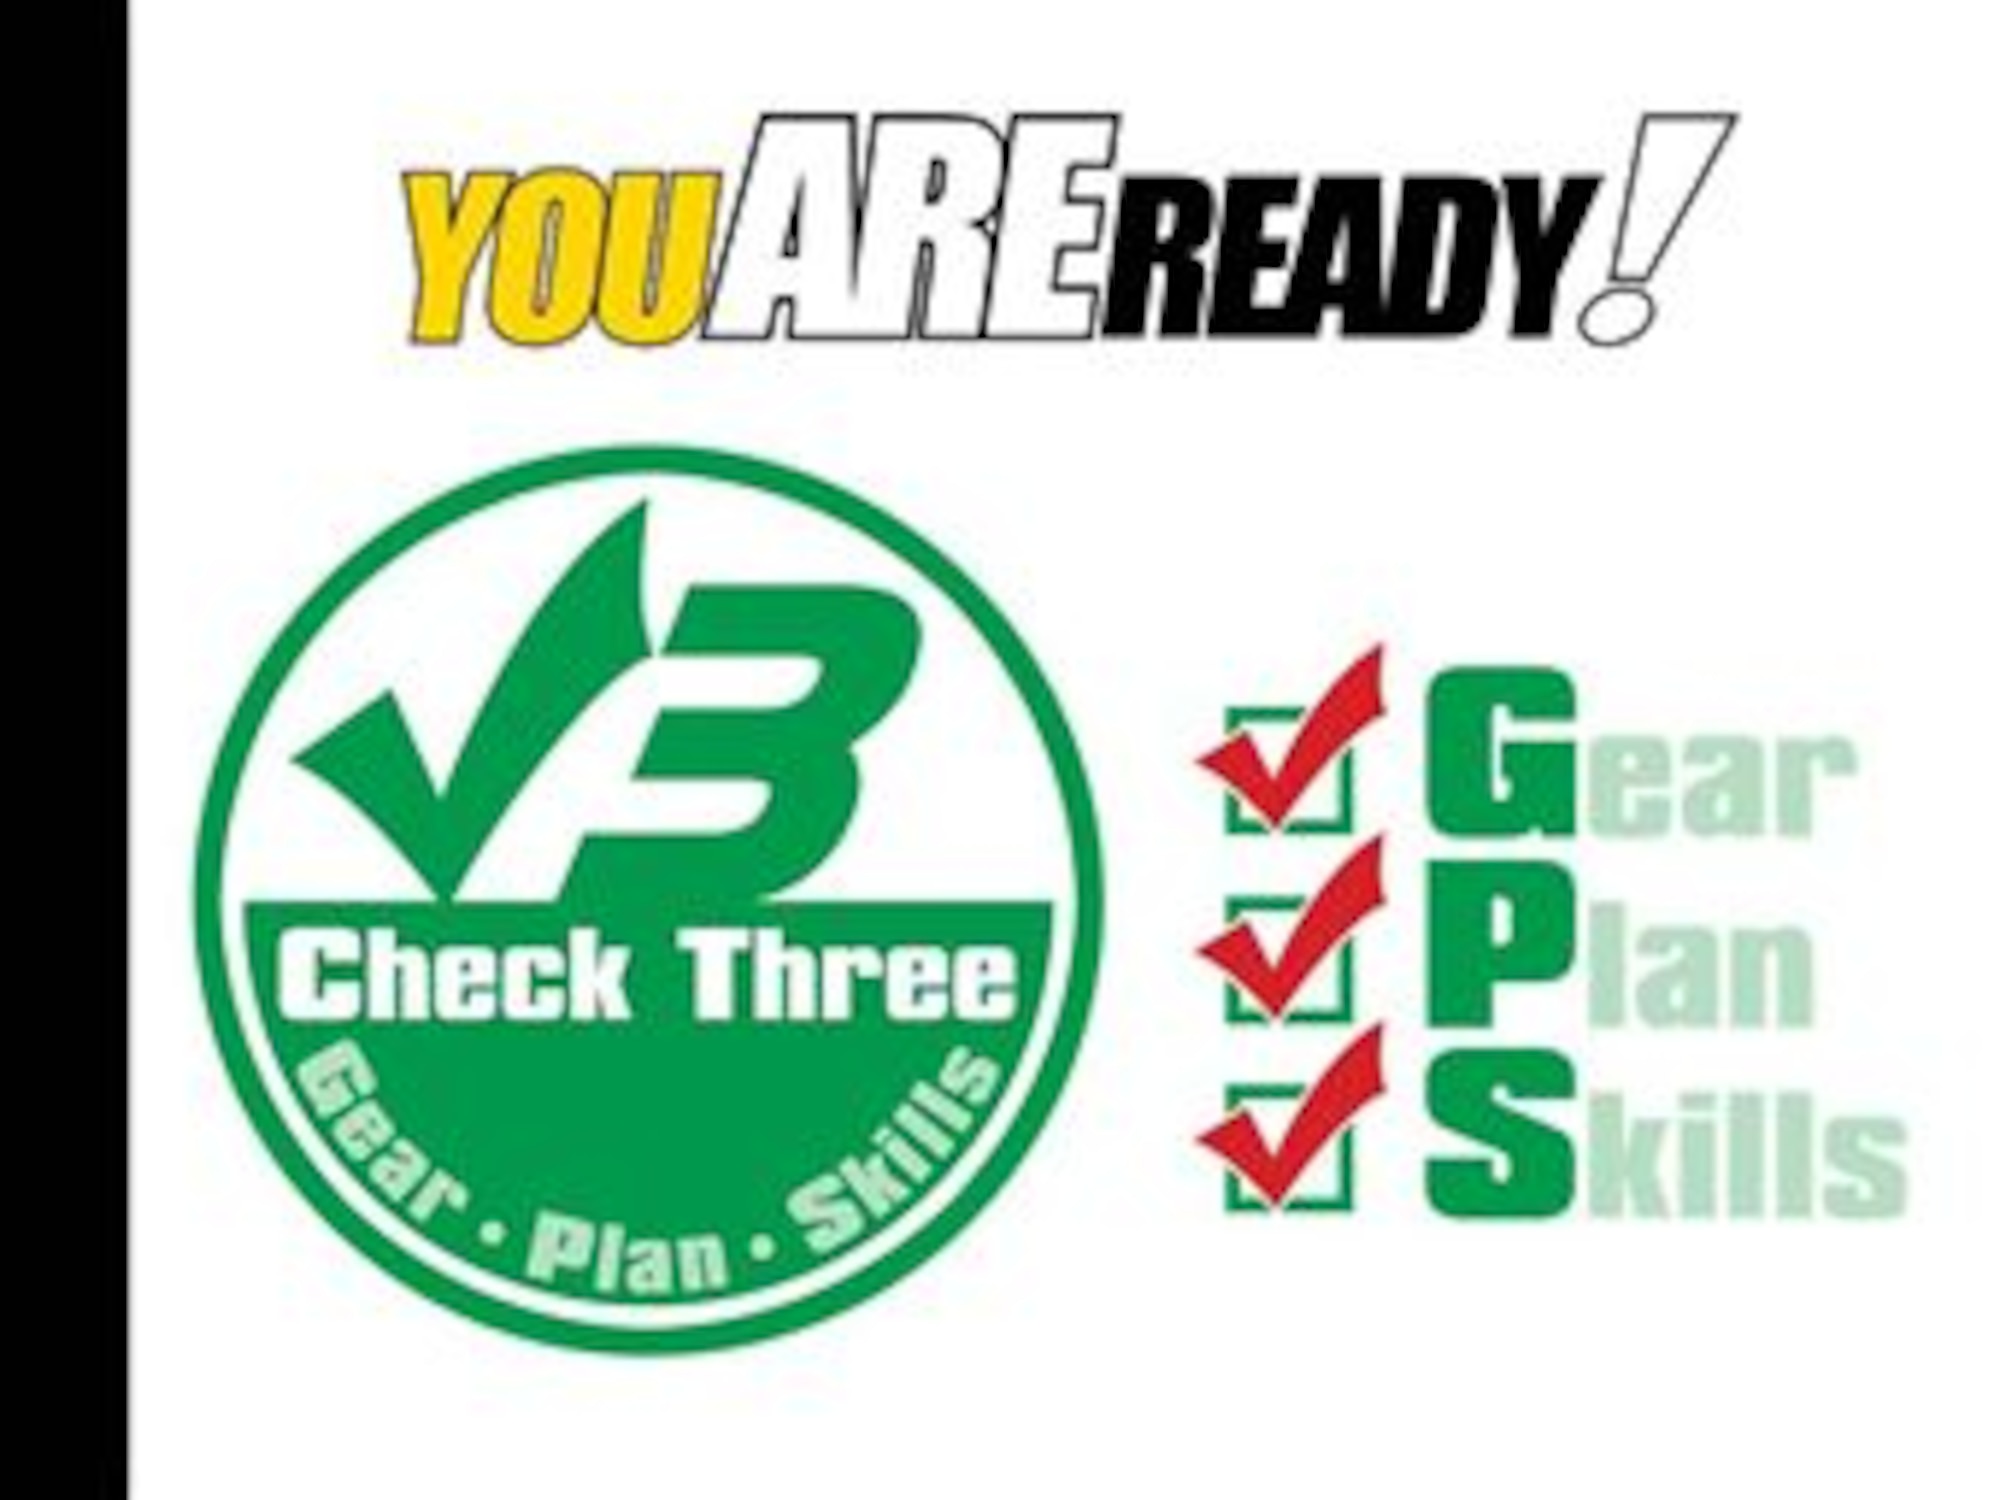 Air Combat Command Safety Office recently released the new off-duty Risk Management (RM) concept “Check 3” to help Airmen prevent injuries and hazards when planning off-duty activities. (U.S. Air Force Graphic)